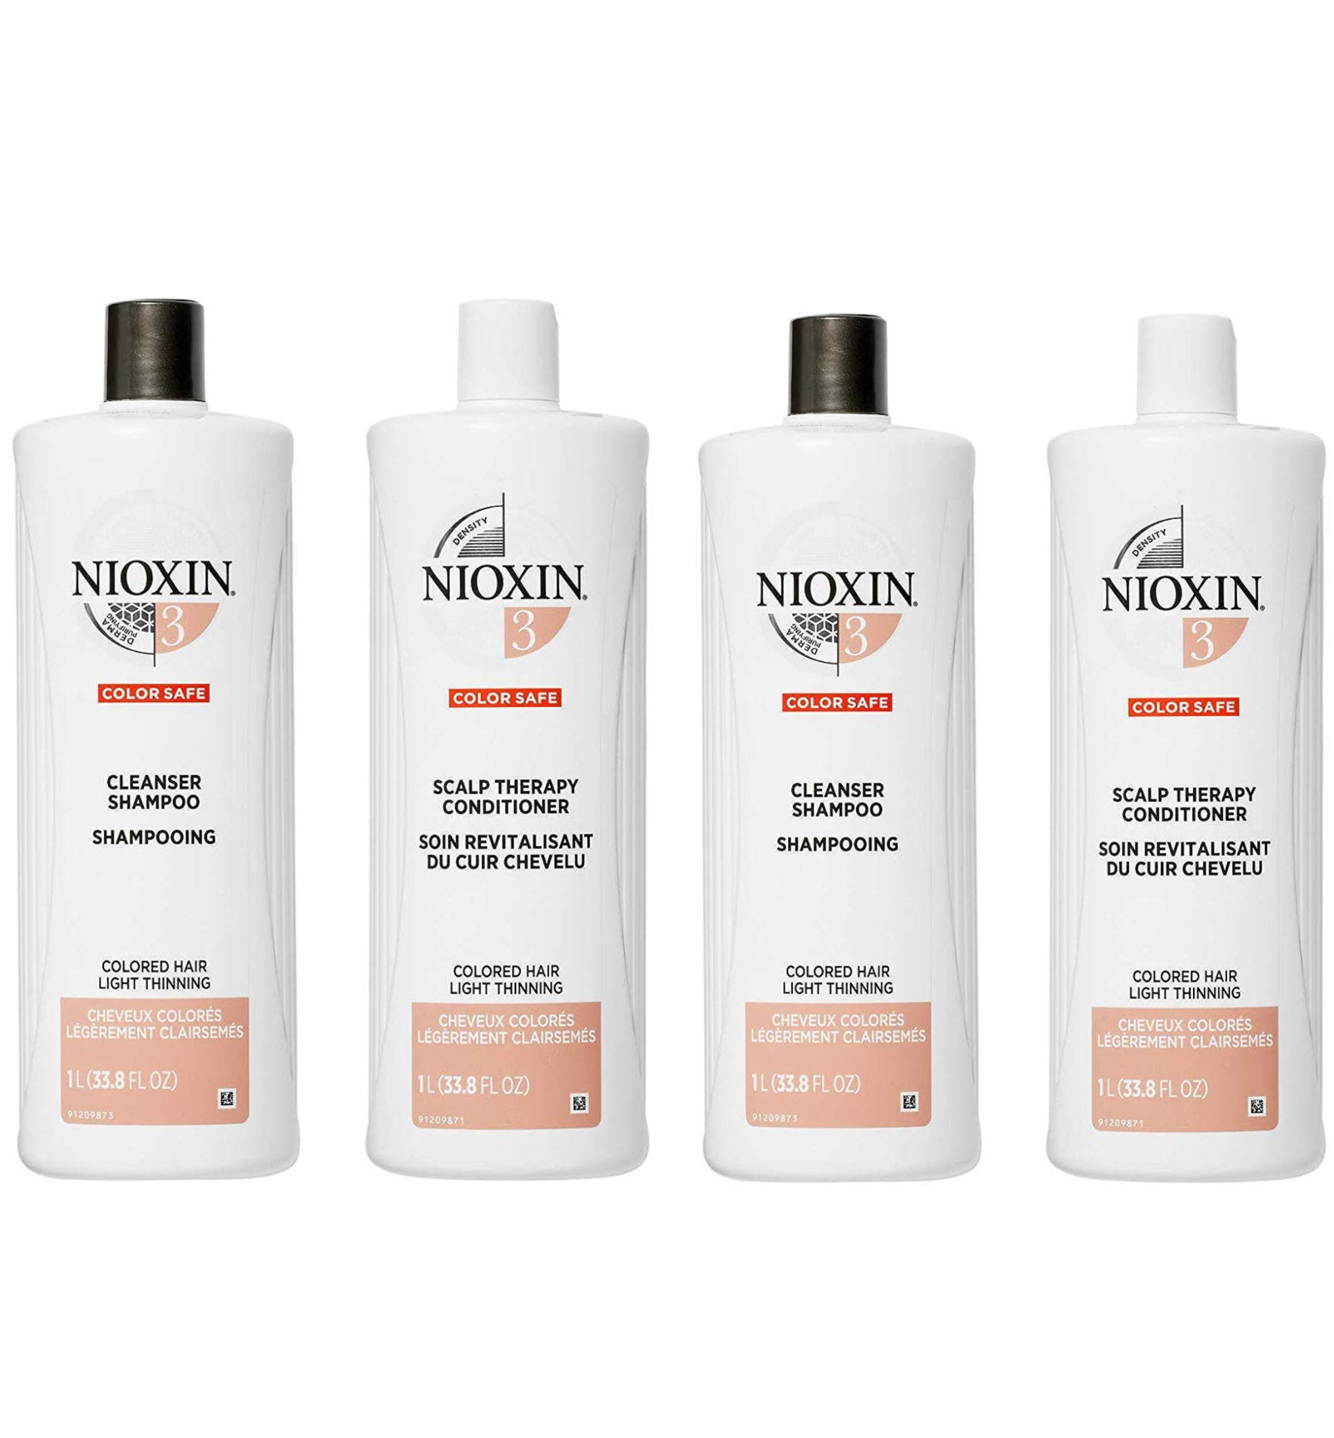 Nioxin System 3 Cleanser & Scalp Therapy 33.8oz Duo 2 Set "Free Shipping" - $81.99